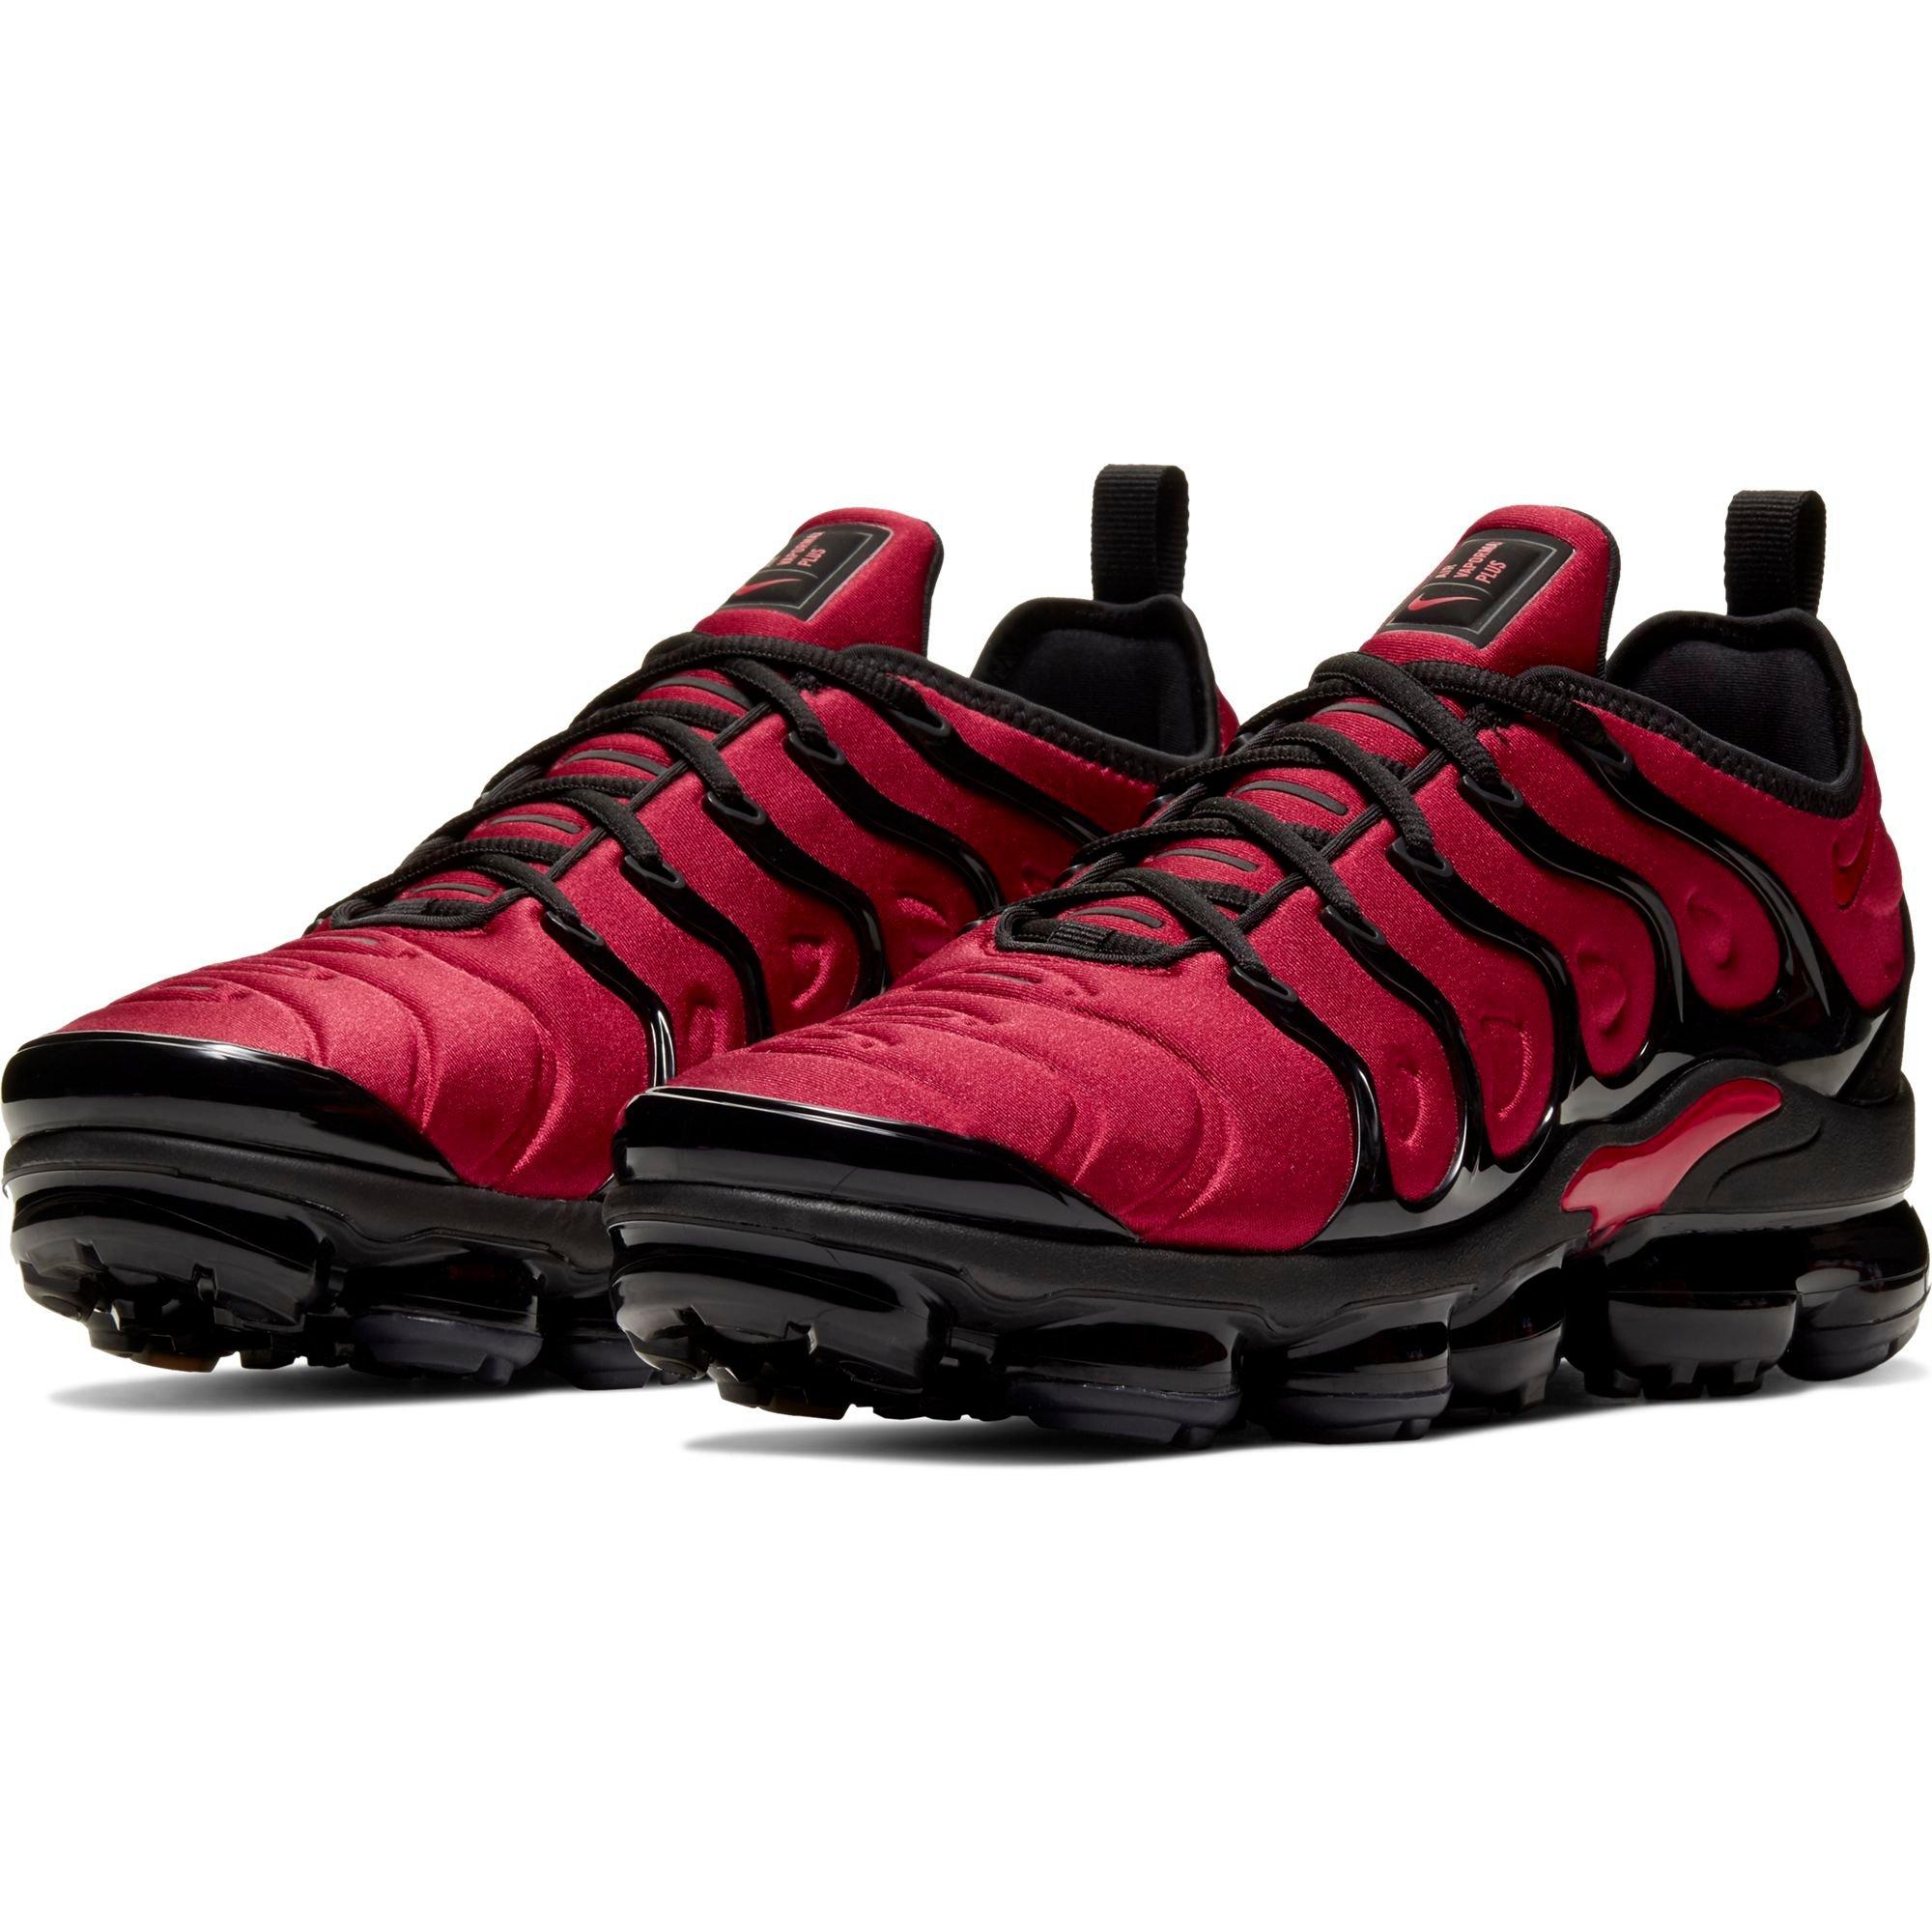 vapor air max red and black